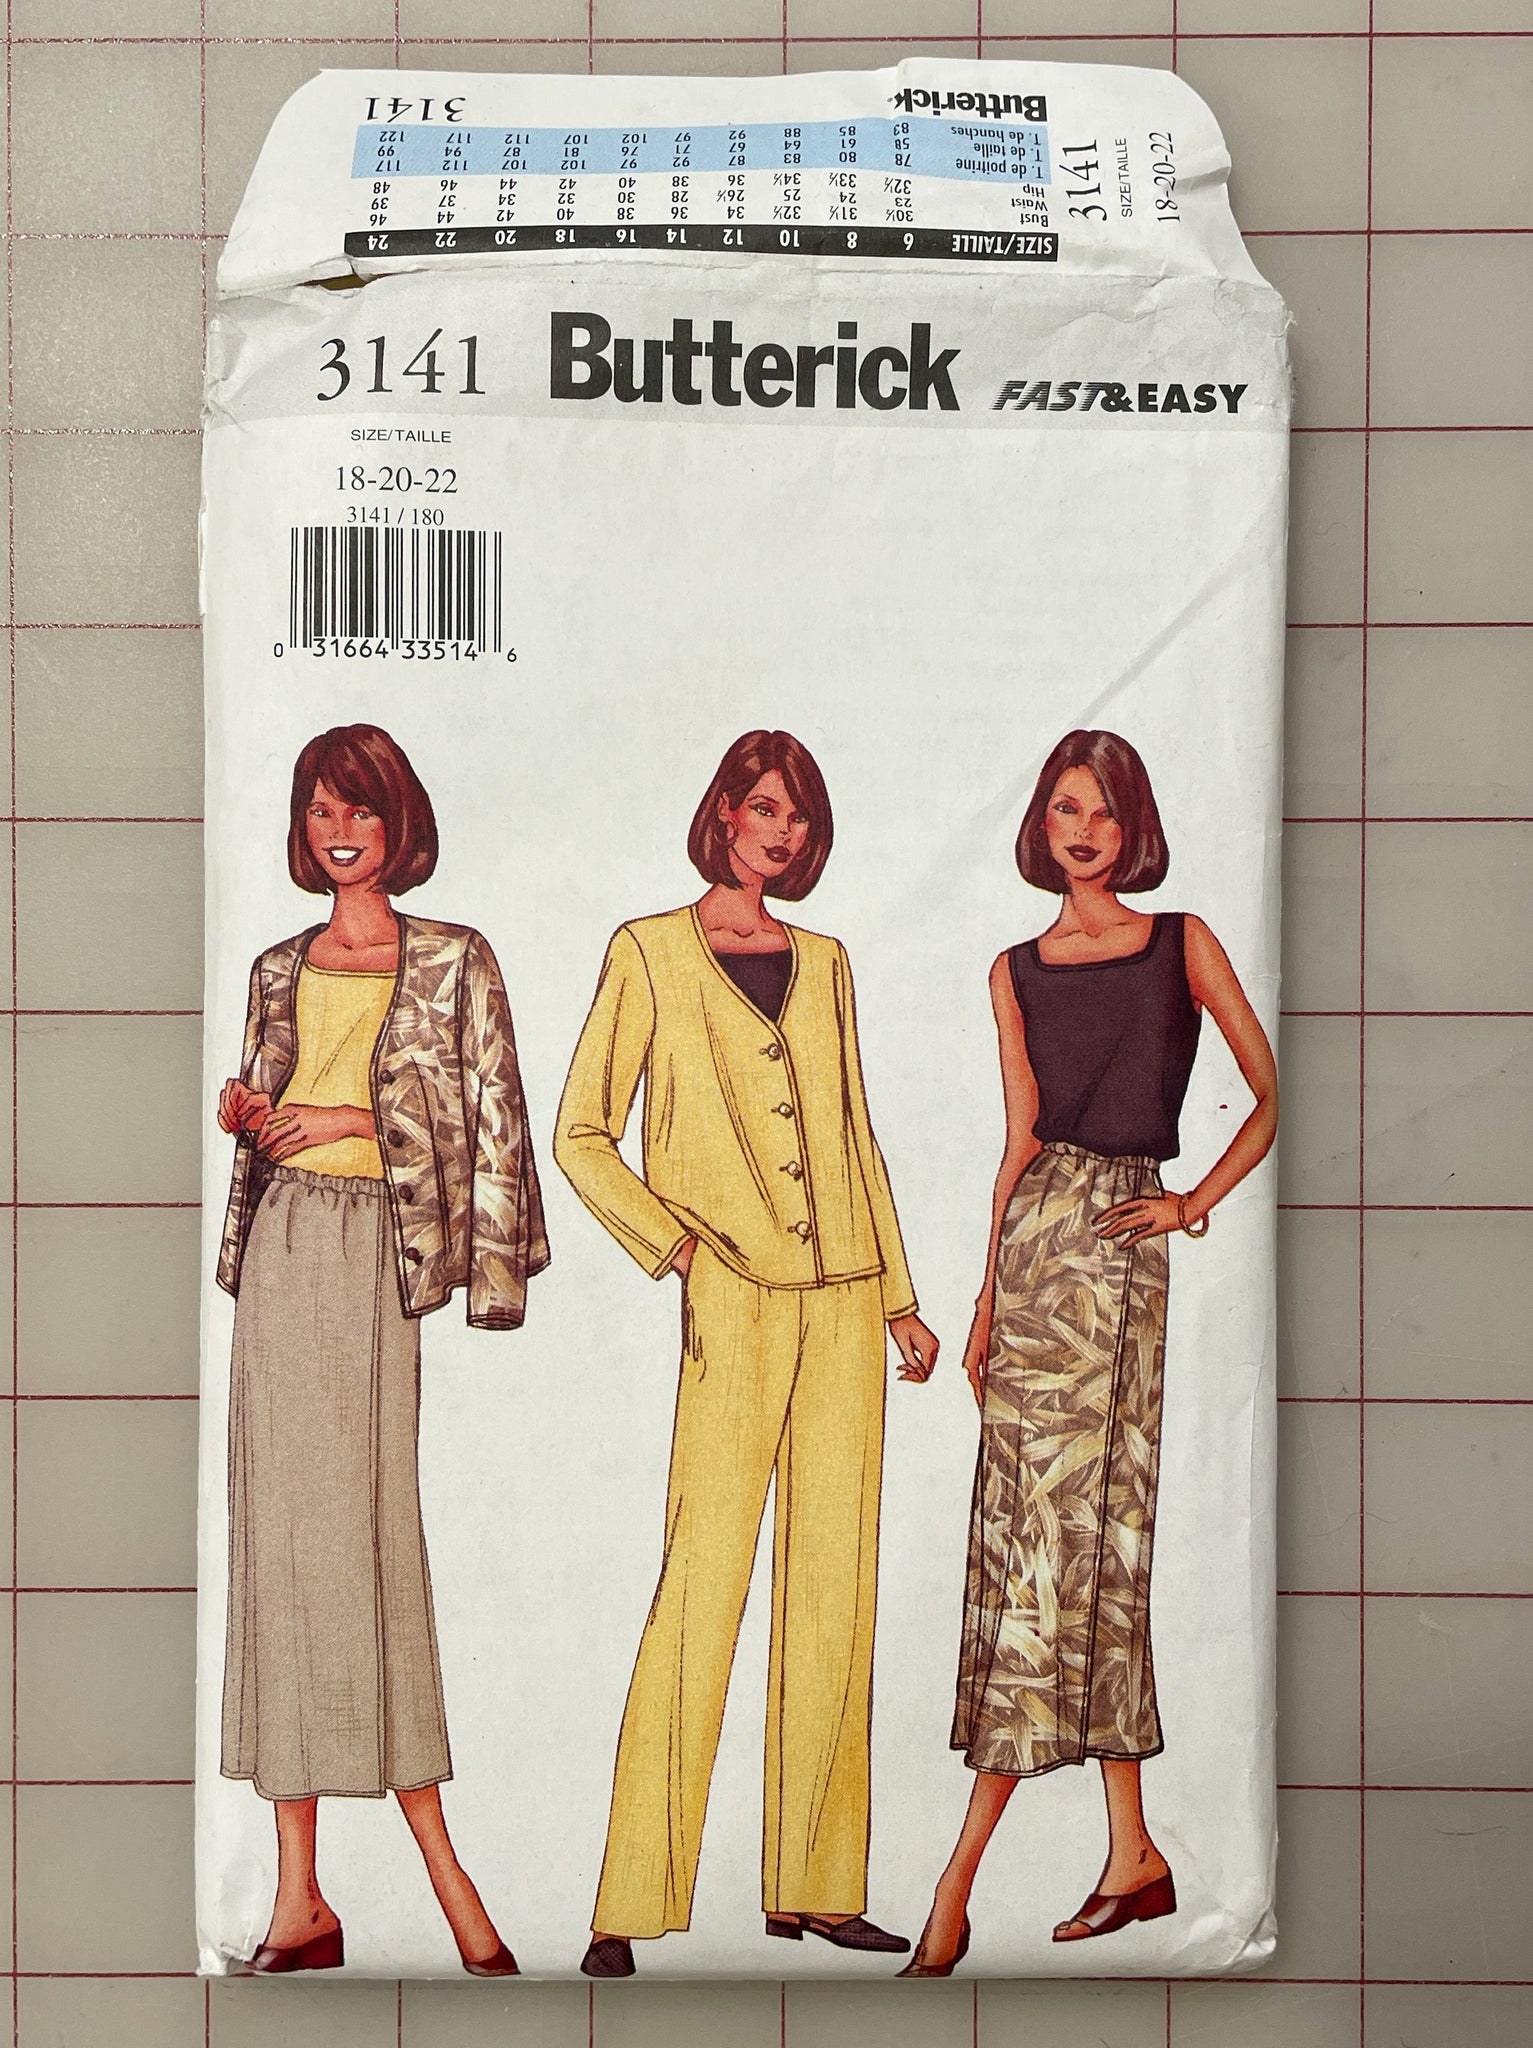 SALE 2001 Butterick 3141 Pattern - Women's Top, Skirt and Pants FACTORY FOLDED